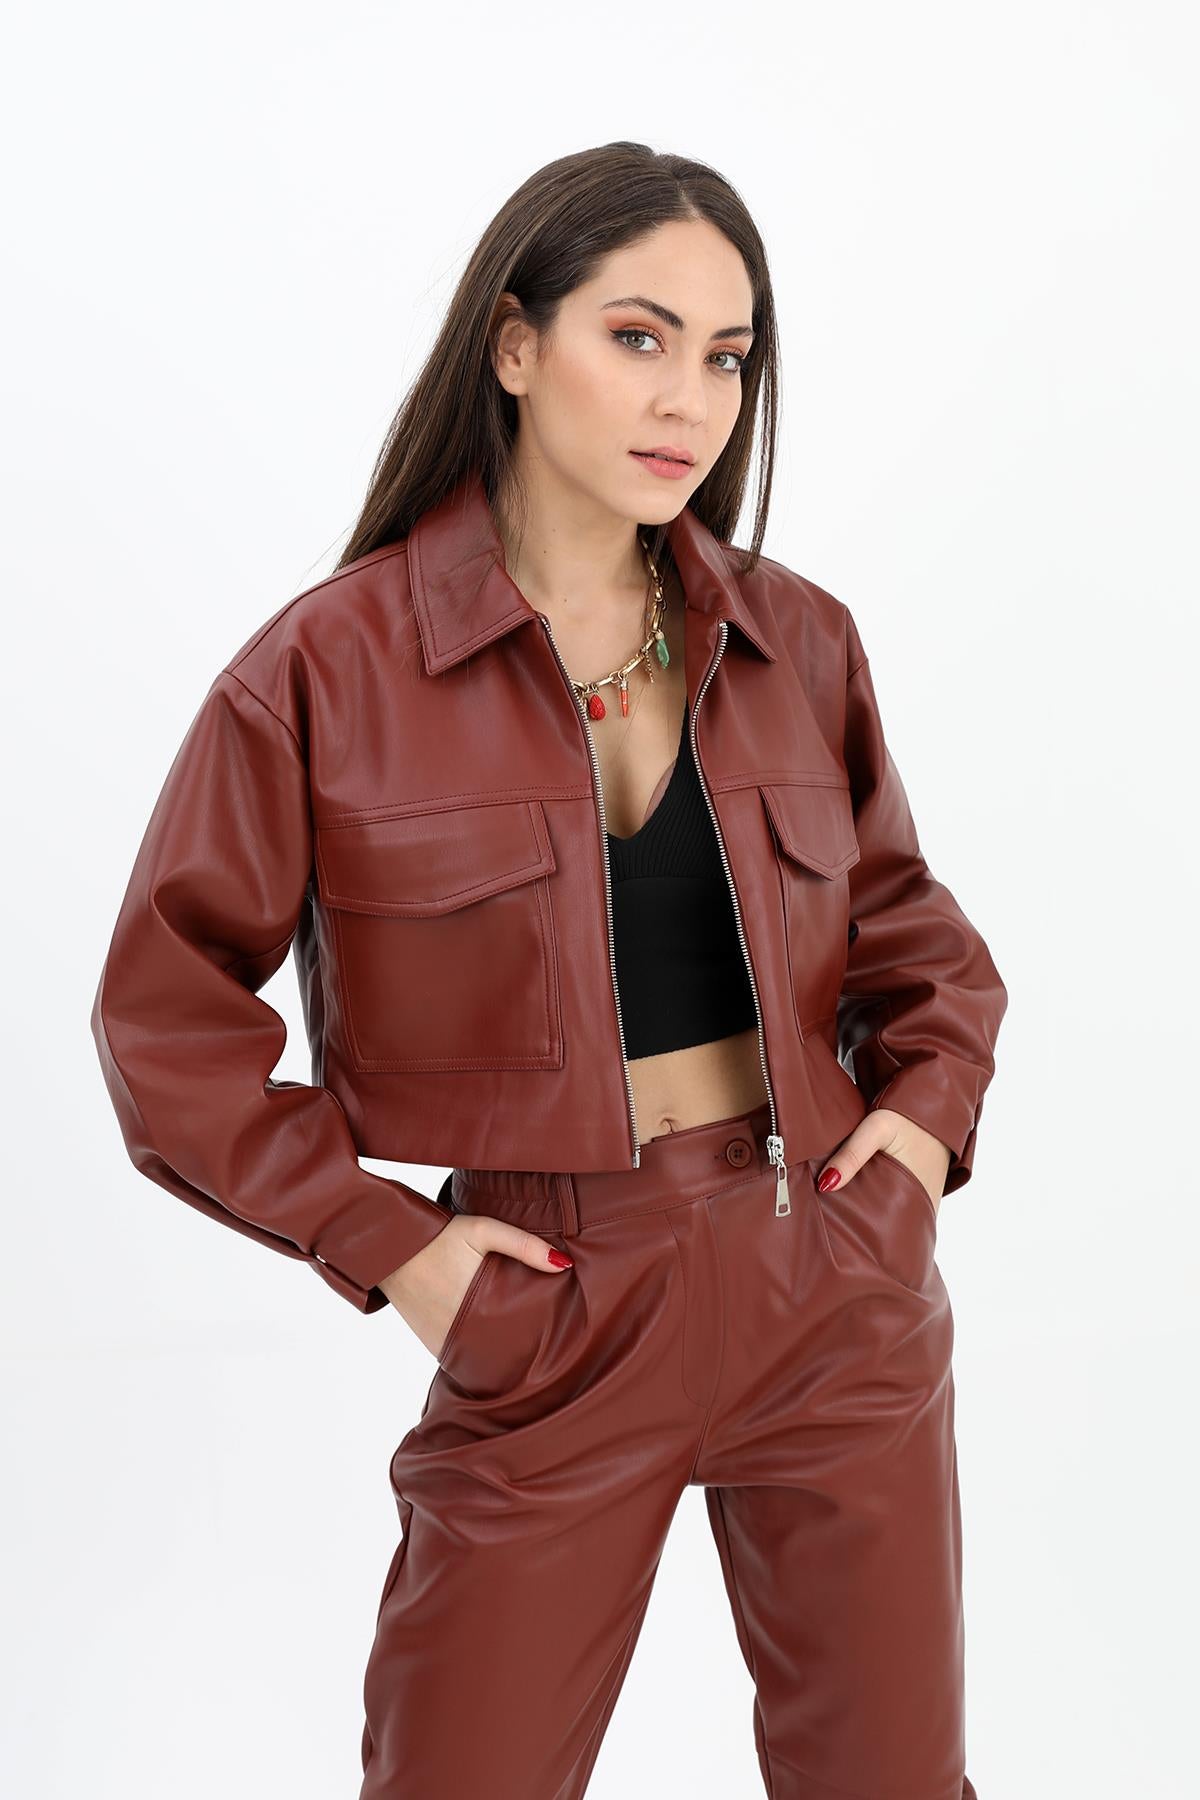 Women's Leather Jacket with Snap on Sleeves and Zipper on the Front - Claret Red - STREETMODE™